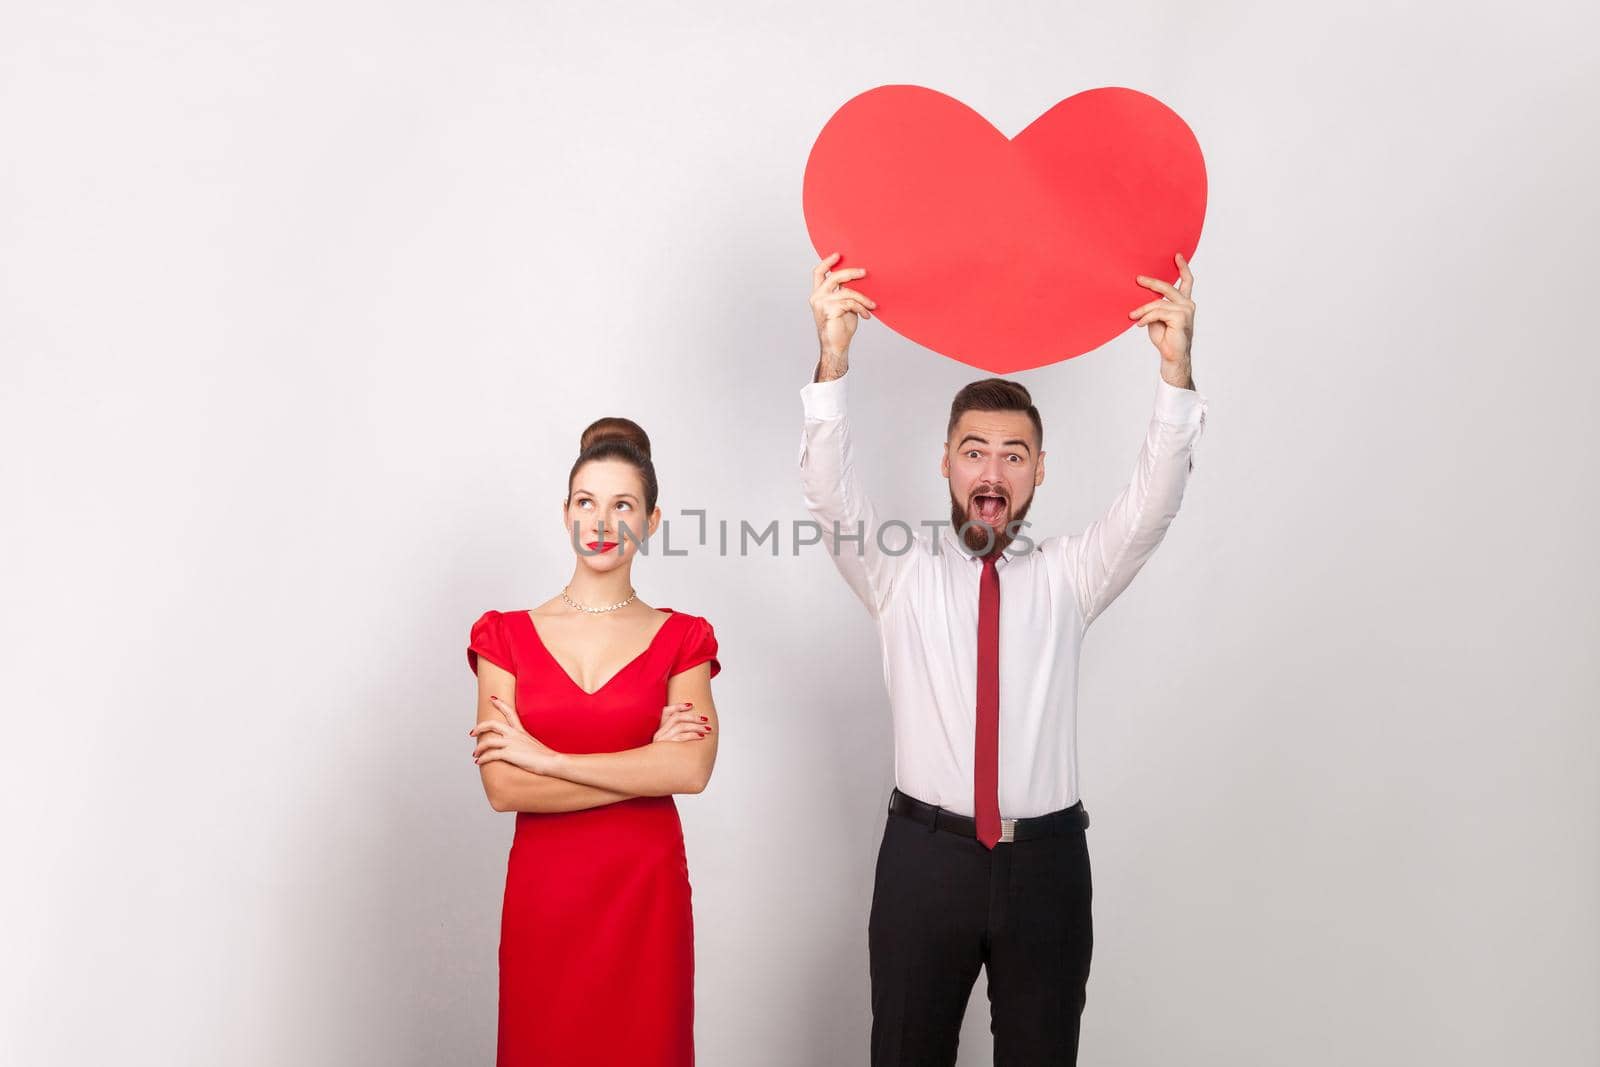 Woman in red dress thinking, happiness man holding red heart. Indoor, studio shot, isolated on gray background